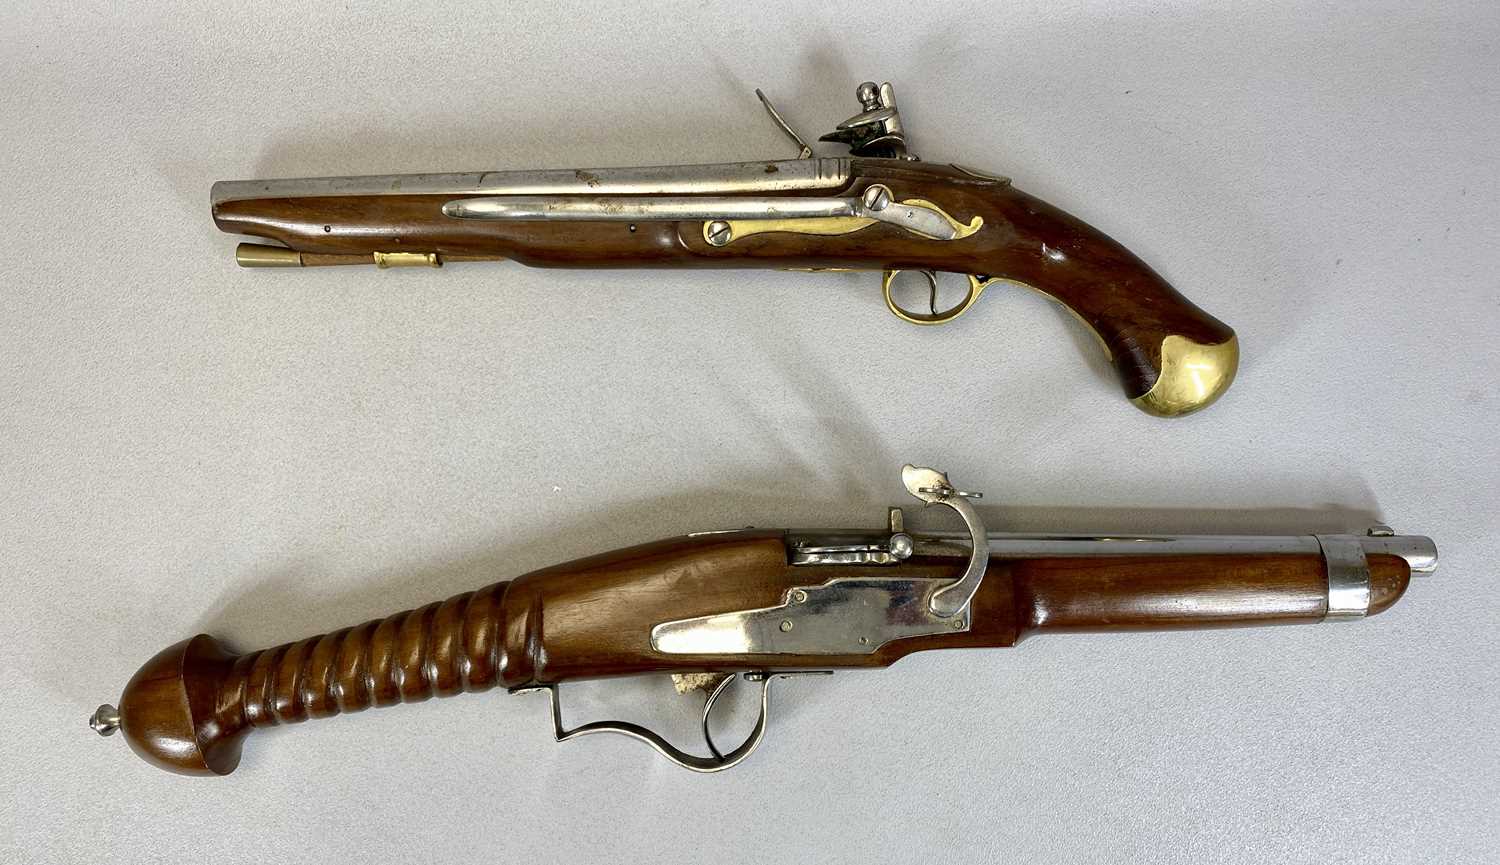 TWO REPLICA PISTOLS, Flintlock Tower pistol with ramrod, stamped on the lock plate, 50cms L, and a